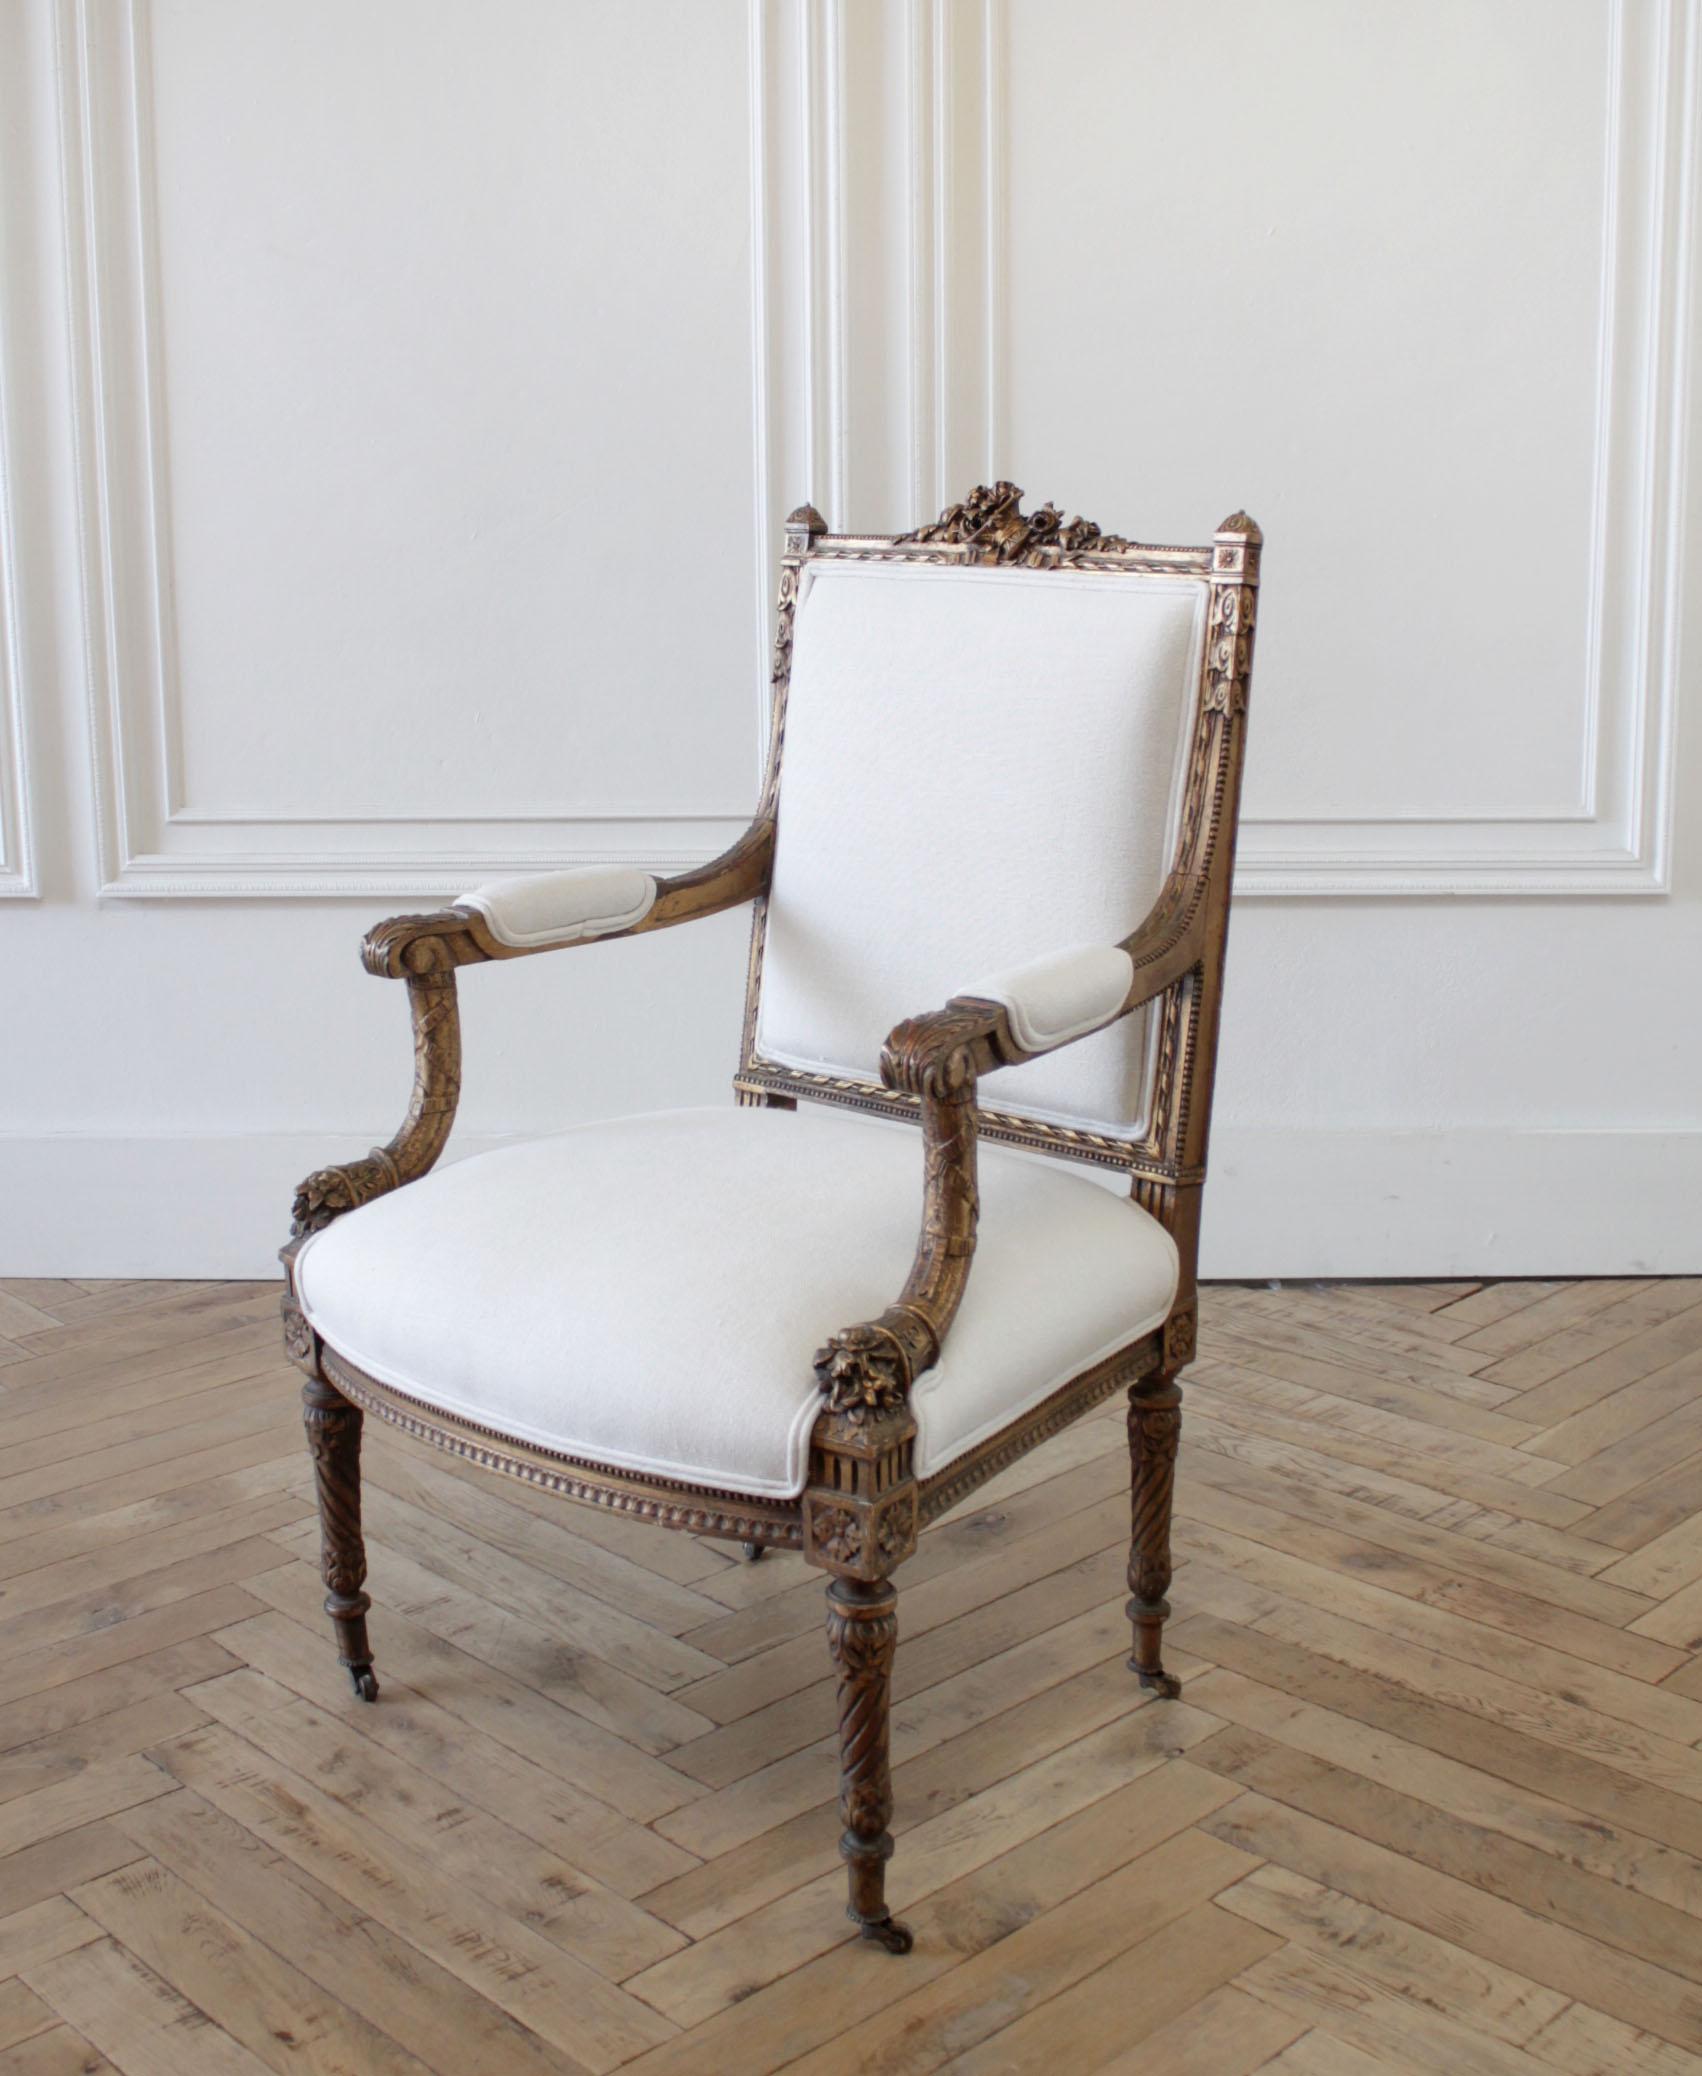 Antique giltwood French Louis XVI style chair with linen upholstery
Original giltwood finish, areas of finish are faded, or worn away. Beautiful carved roses adorn the top the chair, large carved floral cornucopias at the base of each arm. Note